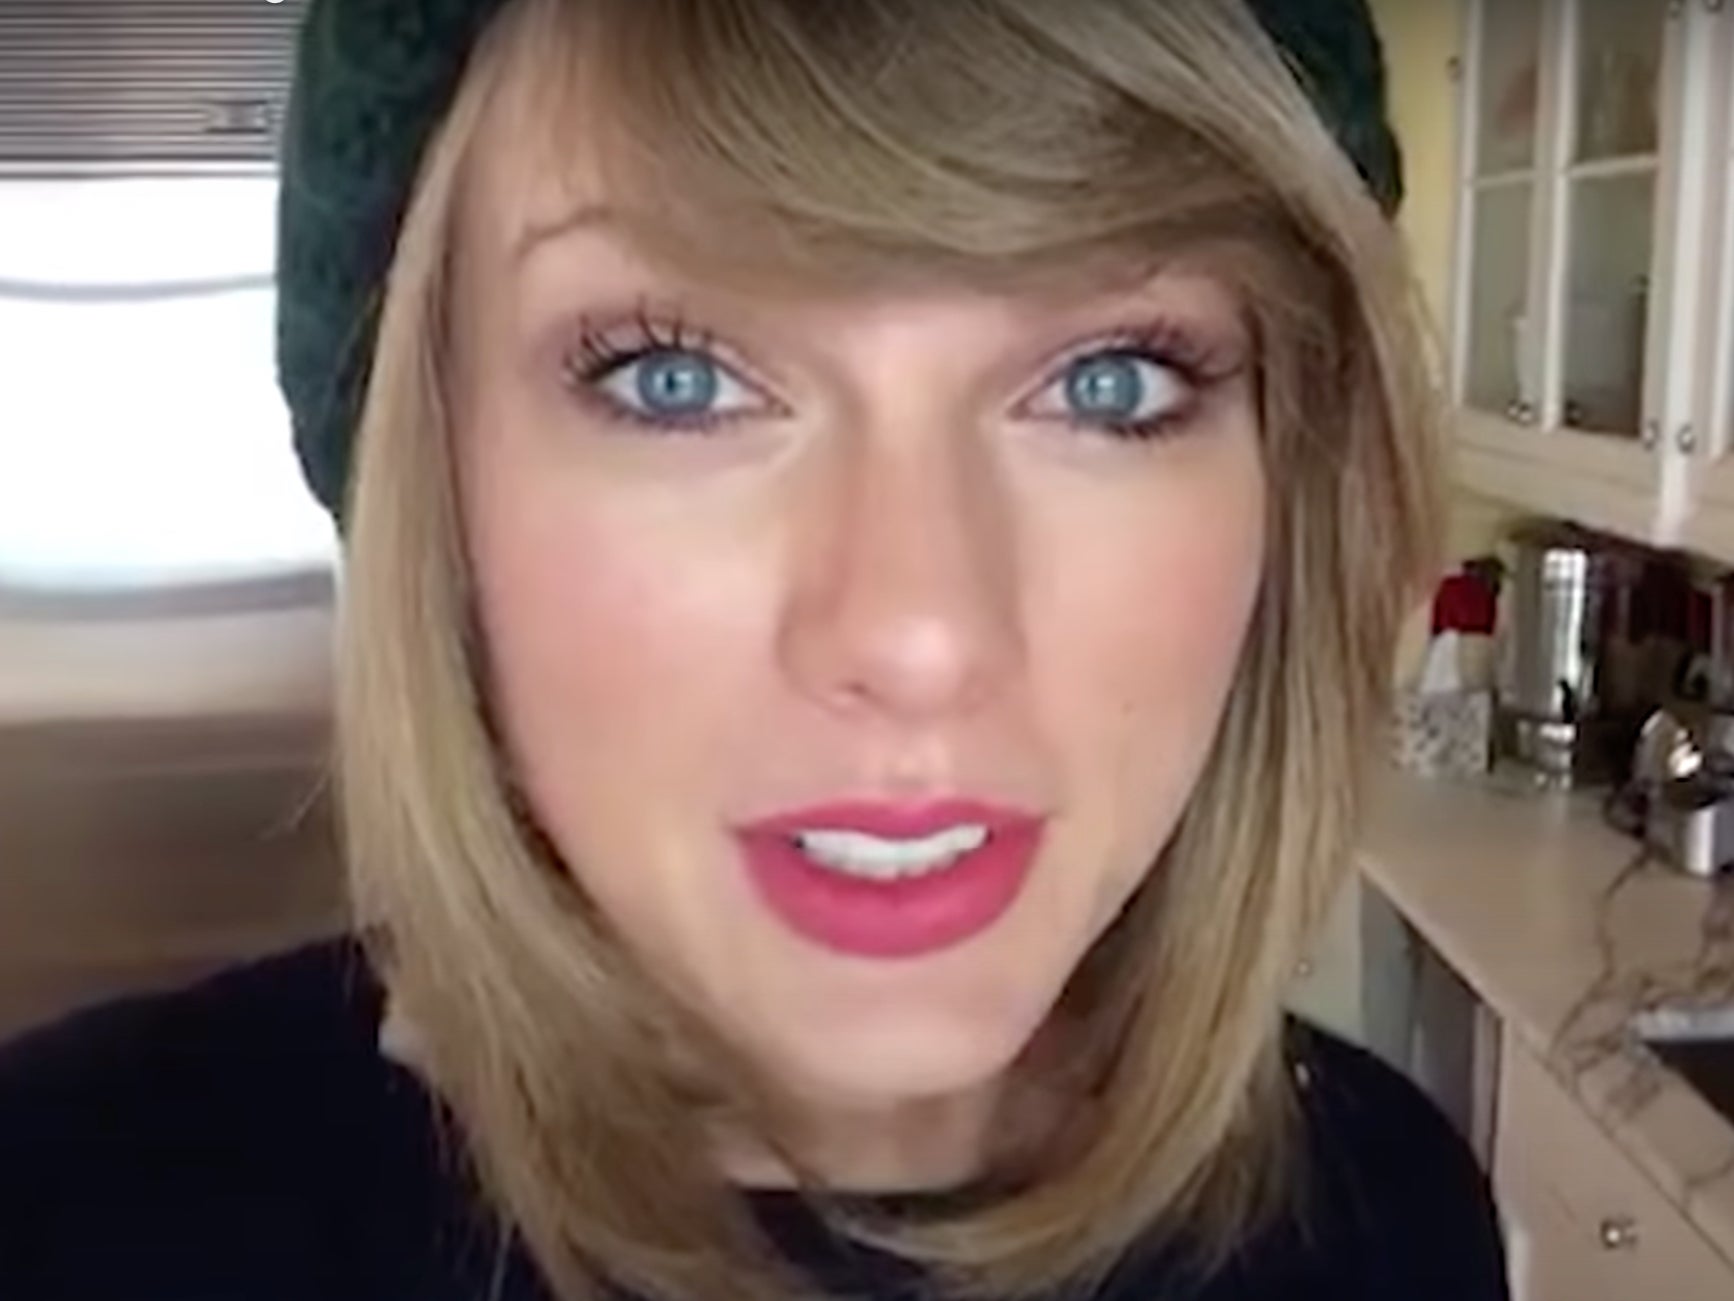 Merry Swiftmas: the singer took to YouTube to give gifts to lucky fans in 2014